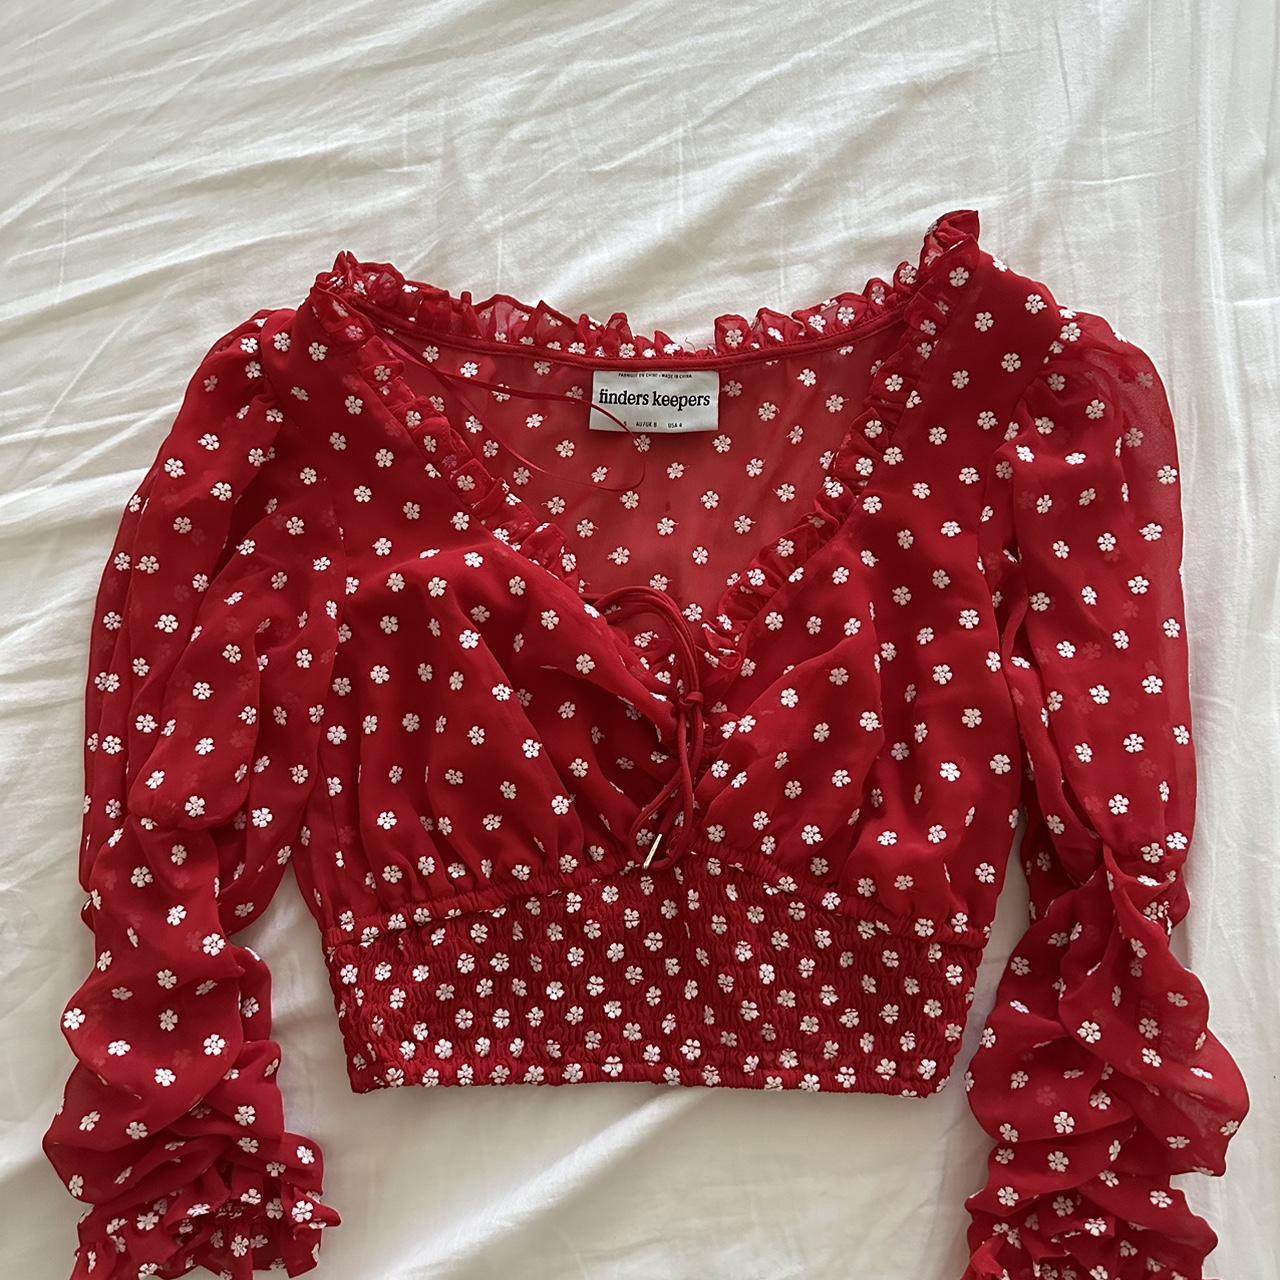 Finders Keepers Women's Blouse